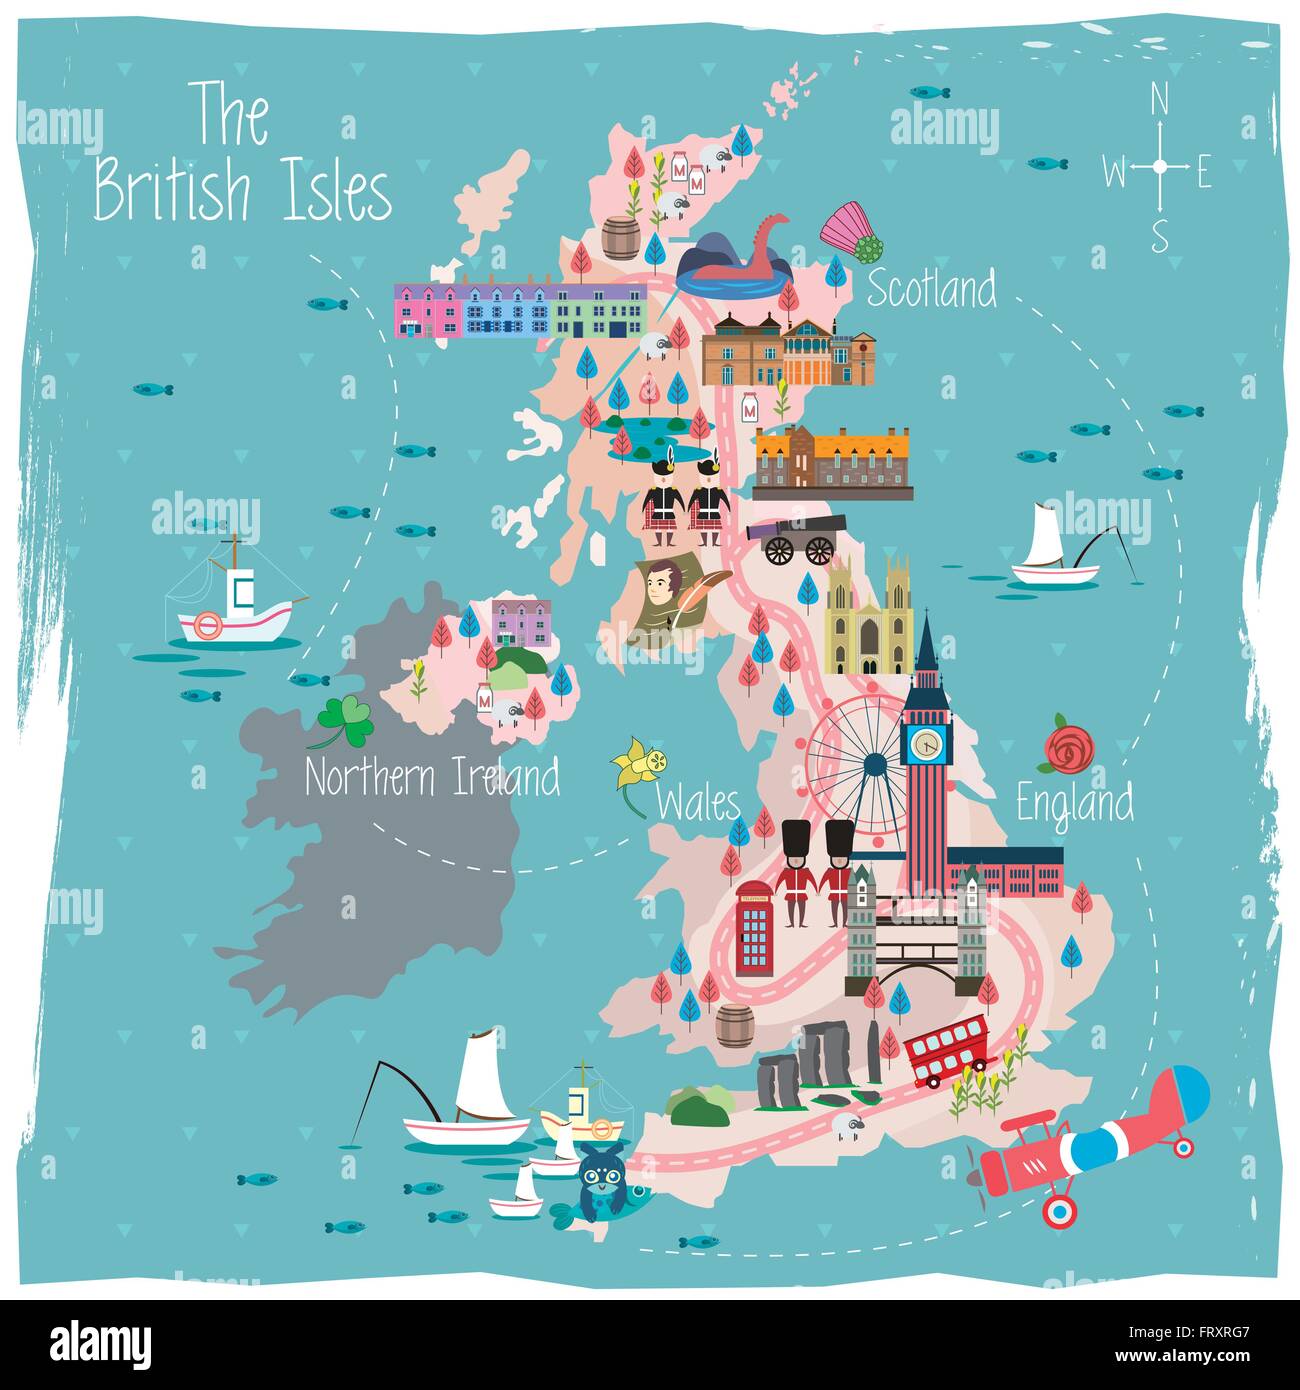 lovely United Kingdom travel map design with attractions Stock Vector